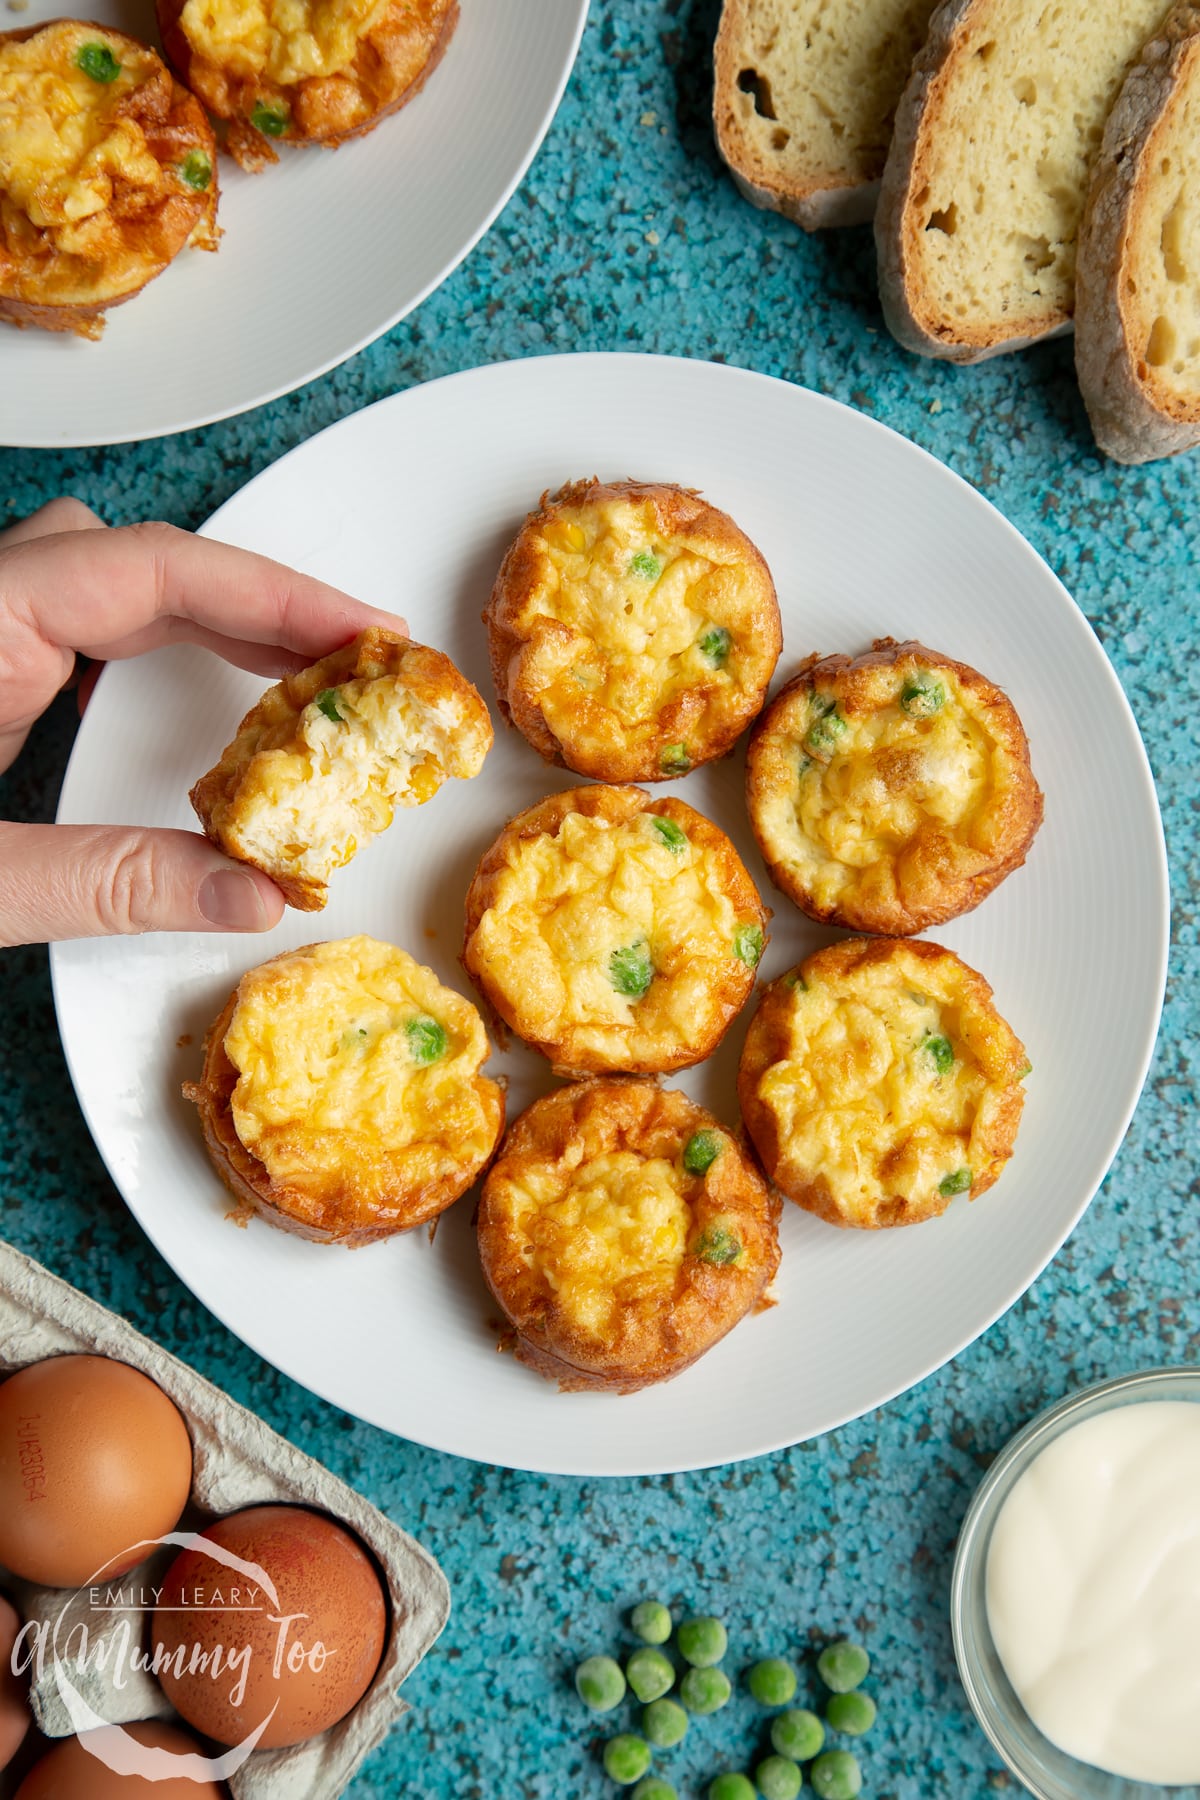 Mini vegetable frittatas arranged on a white plate. Slices of bread and ingredients surround the plate. A hand reaches in to take a frittata, tilted to show the creamy, fluffy inner.